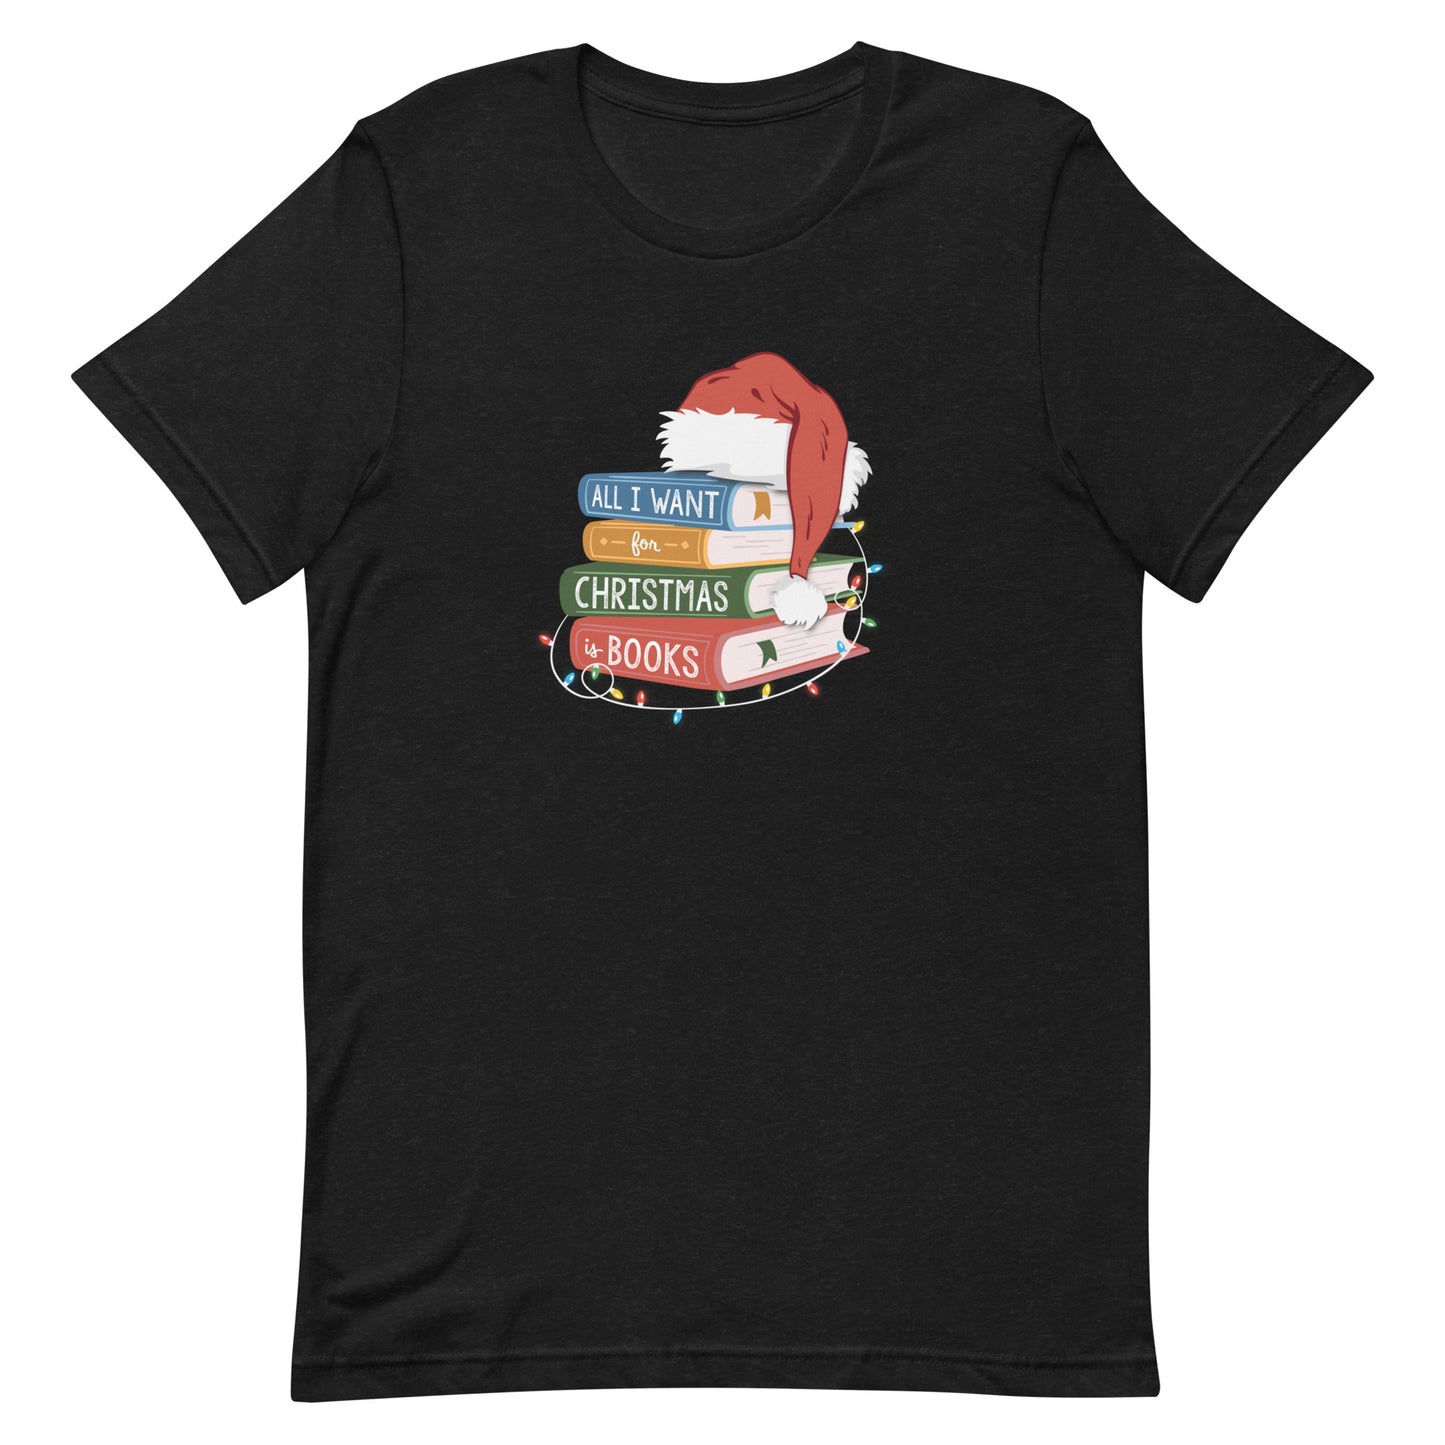 all i want for christmas is books (book stack) t-shirt